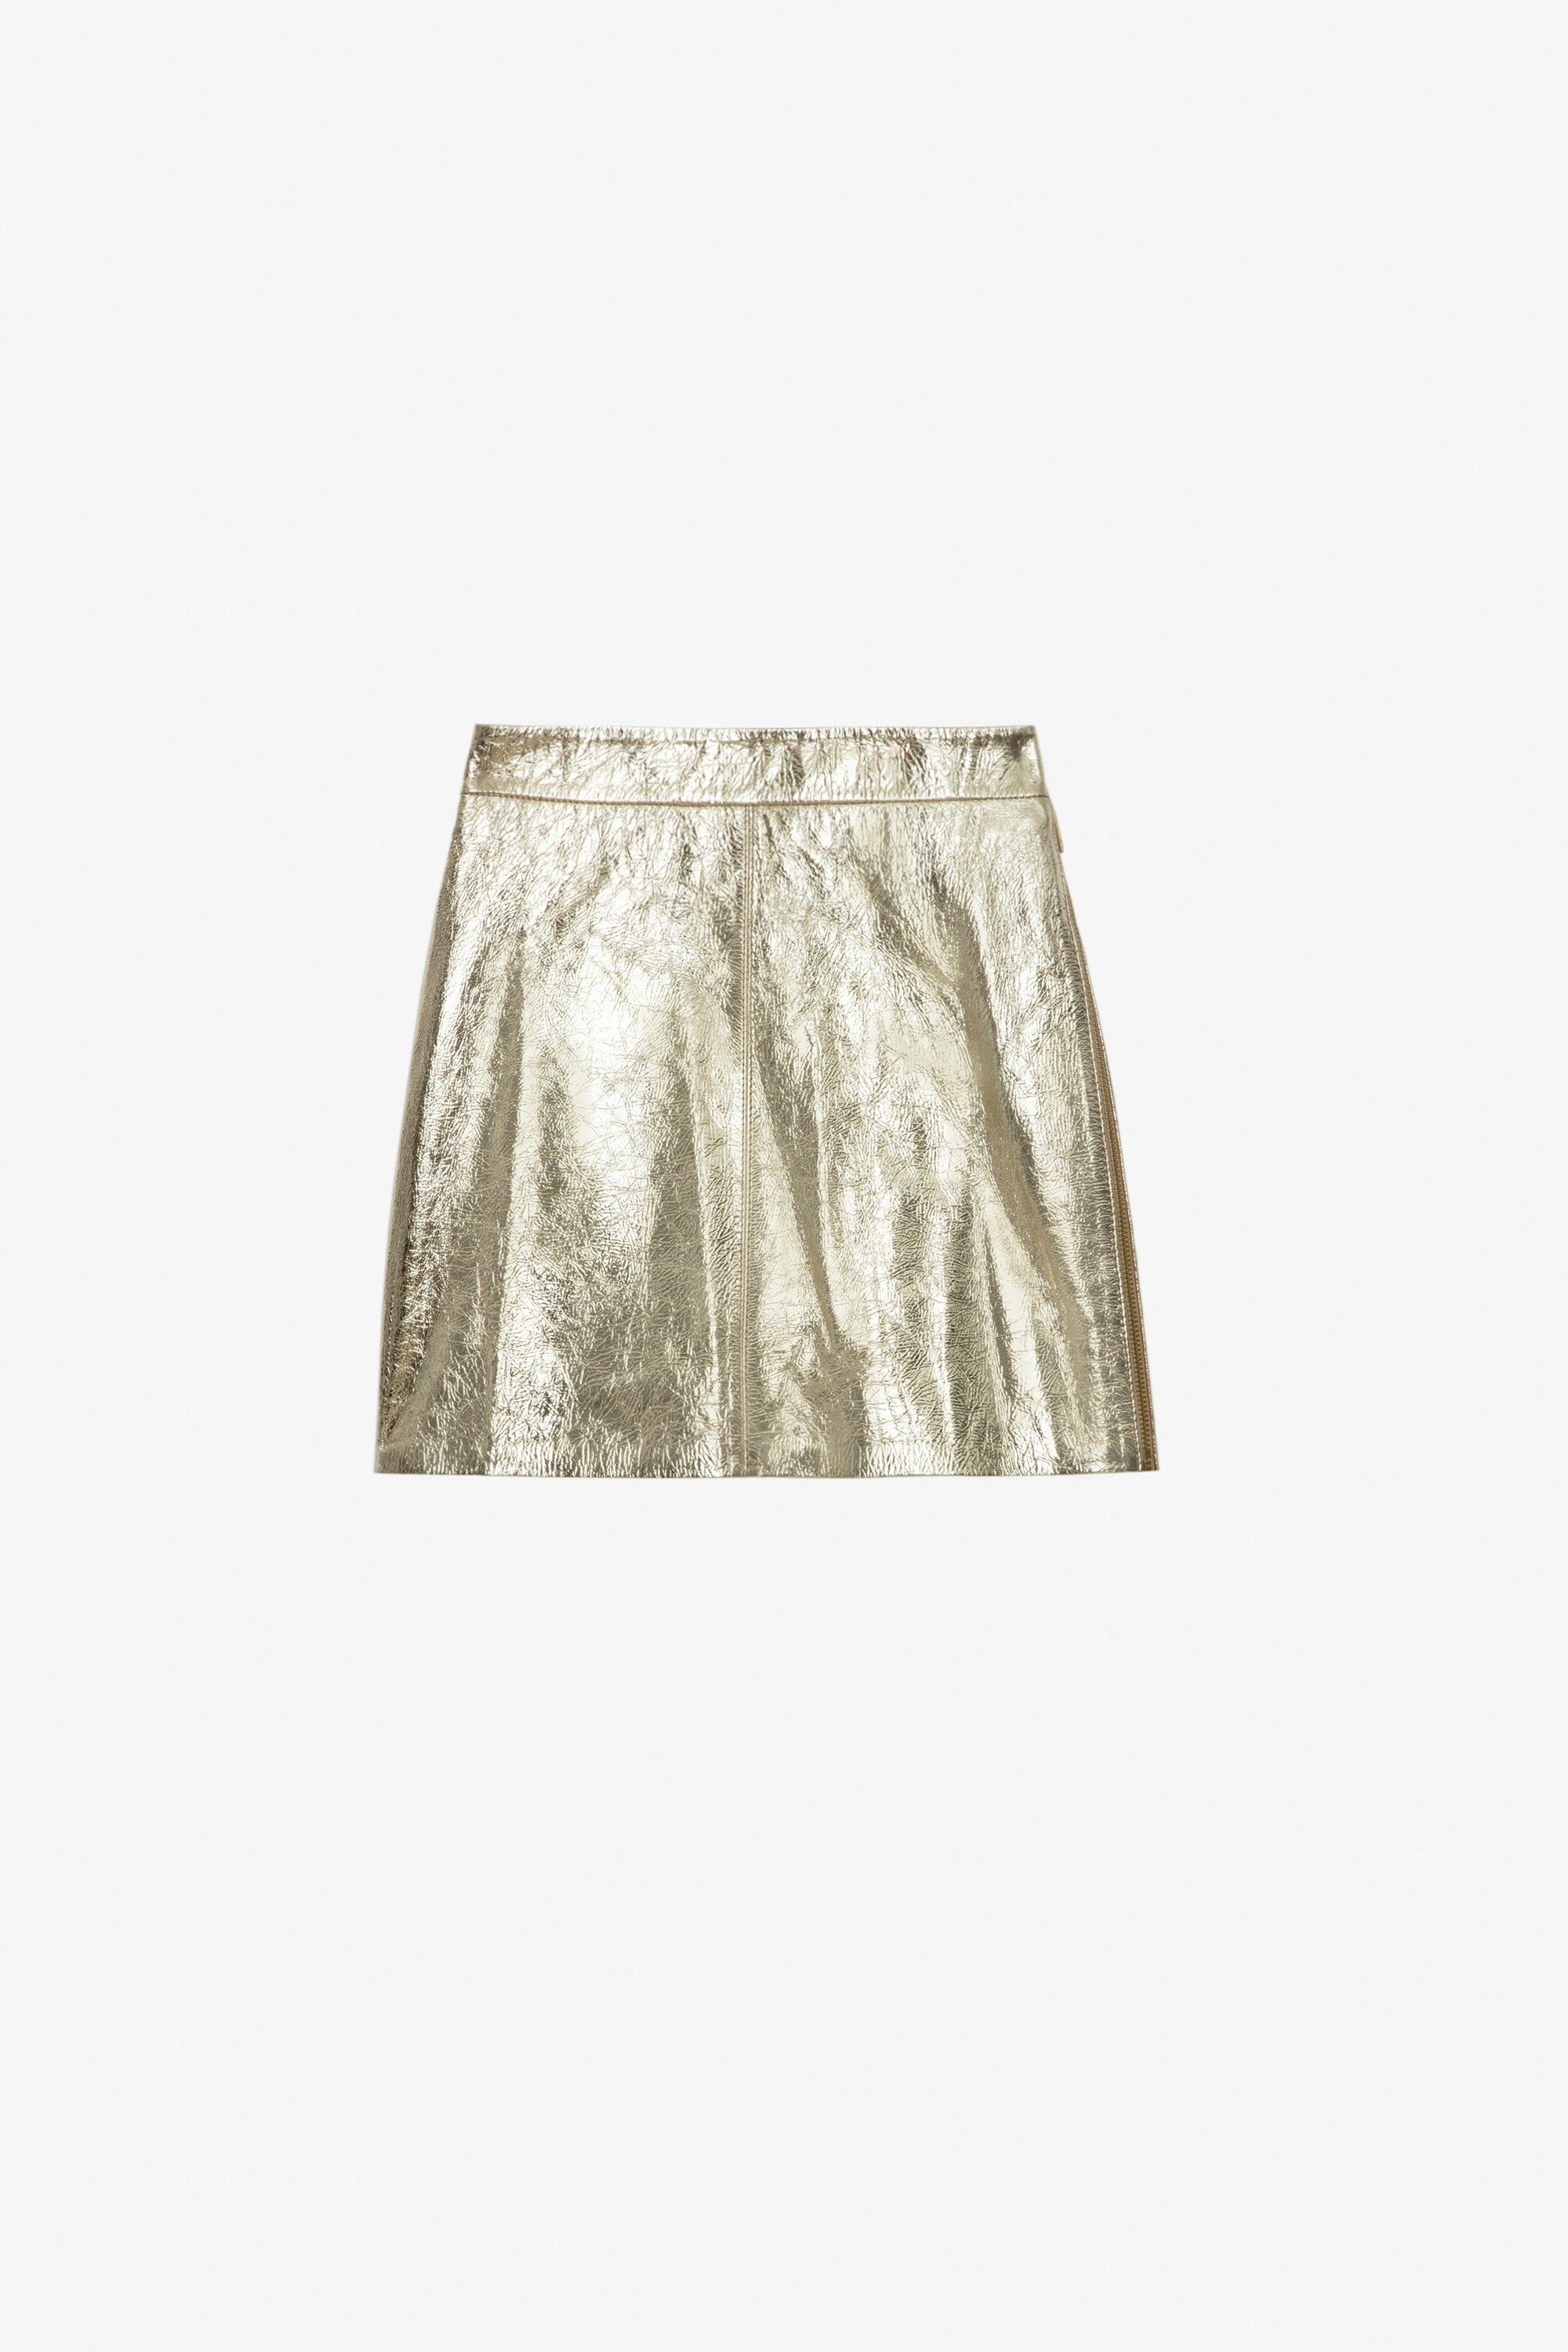 Jinette Leather Skirt - Gold metallic leather mini skirt with zip.